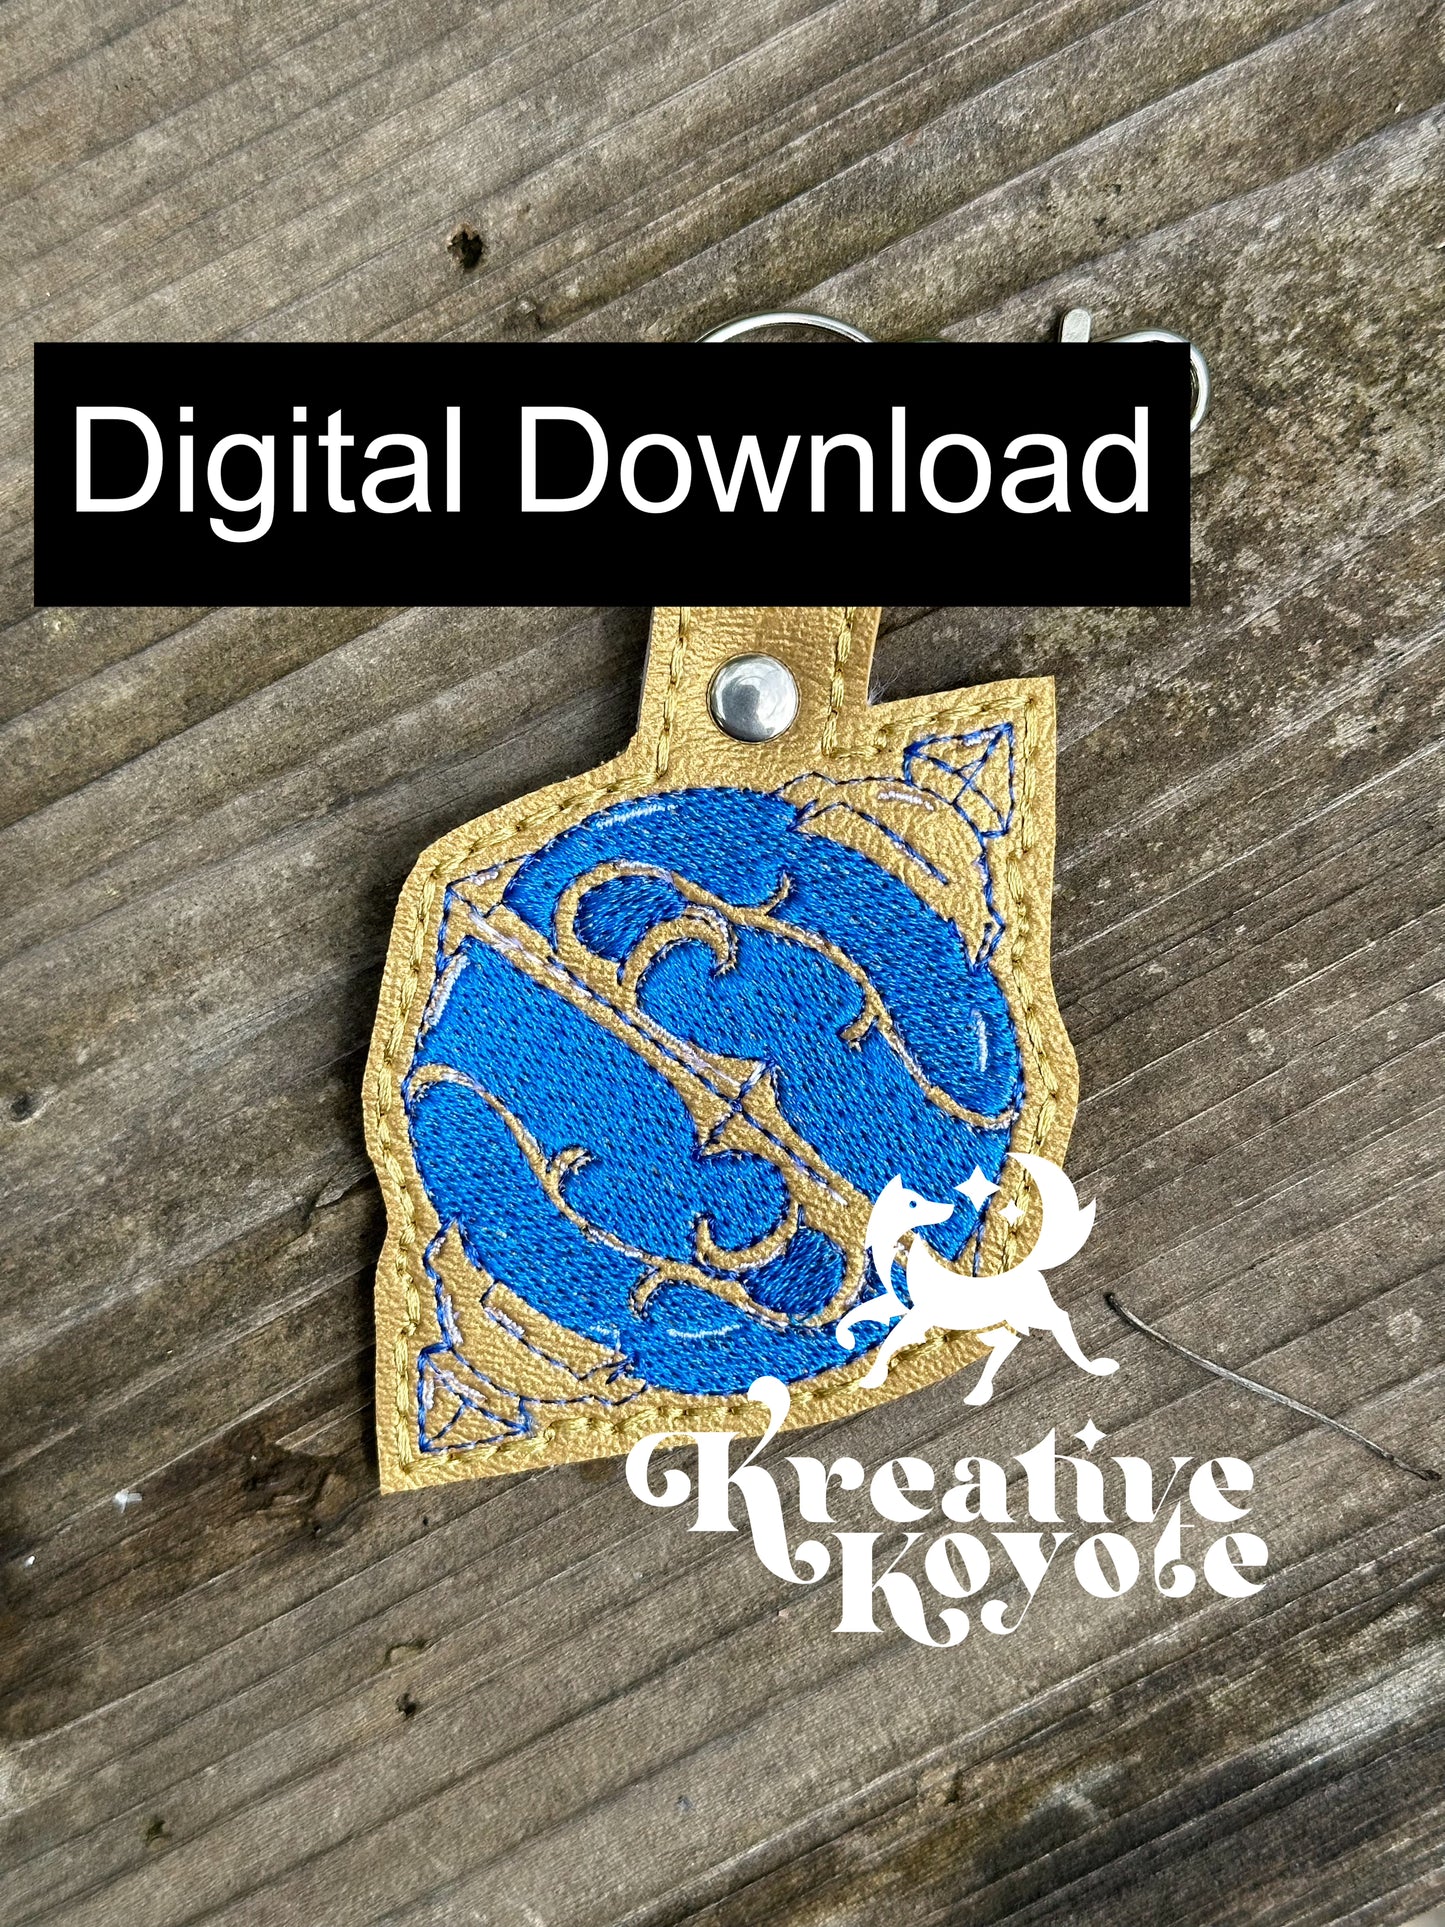 Sphere Keyfob - ITH Machine Embroidery Pattern